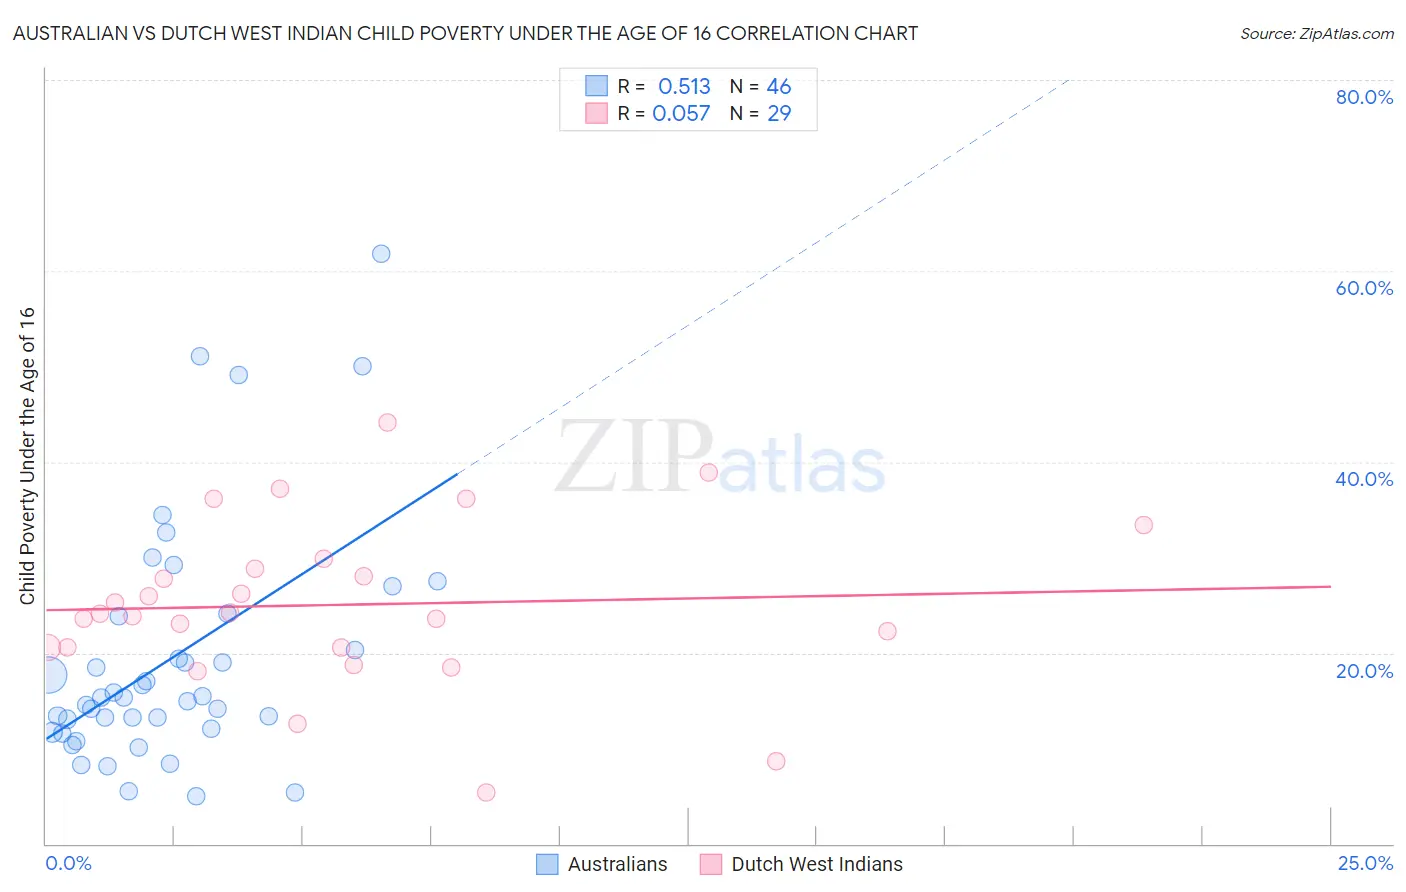 Australian vs Dutch West Indian Child Poverty Under the Age of 16